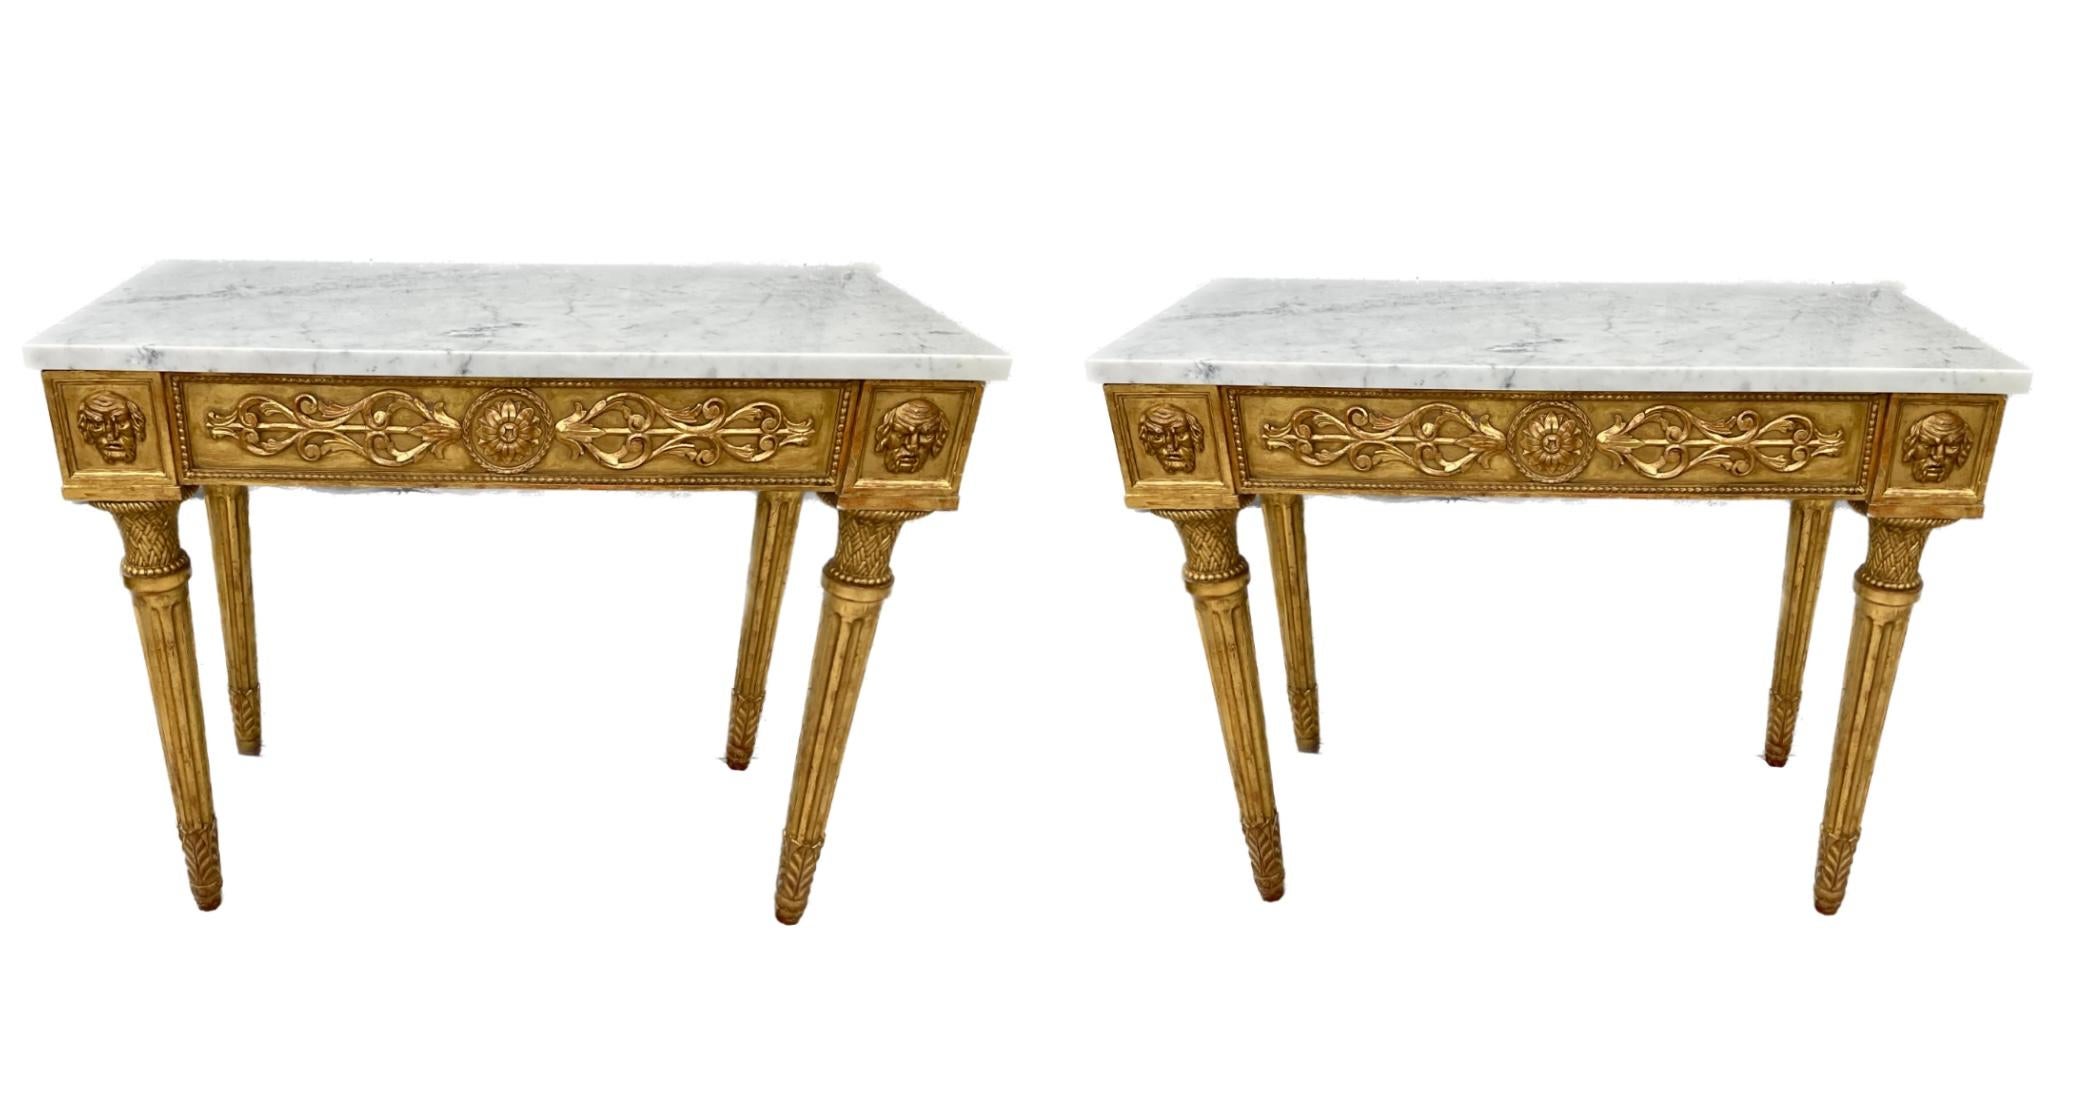 Pair Of 19th Century Italian Neoclassical Giltwood Console table With Marble Top For Sale 10